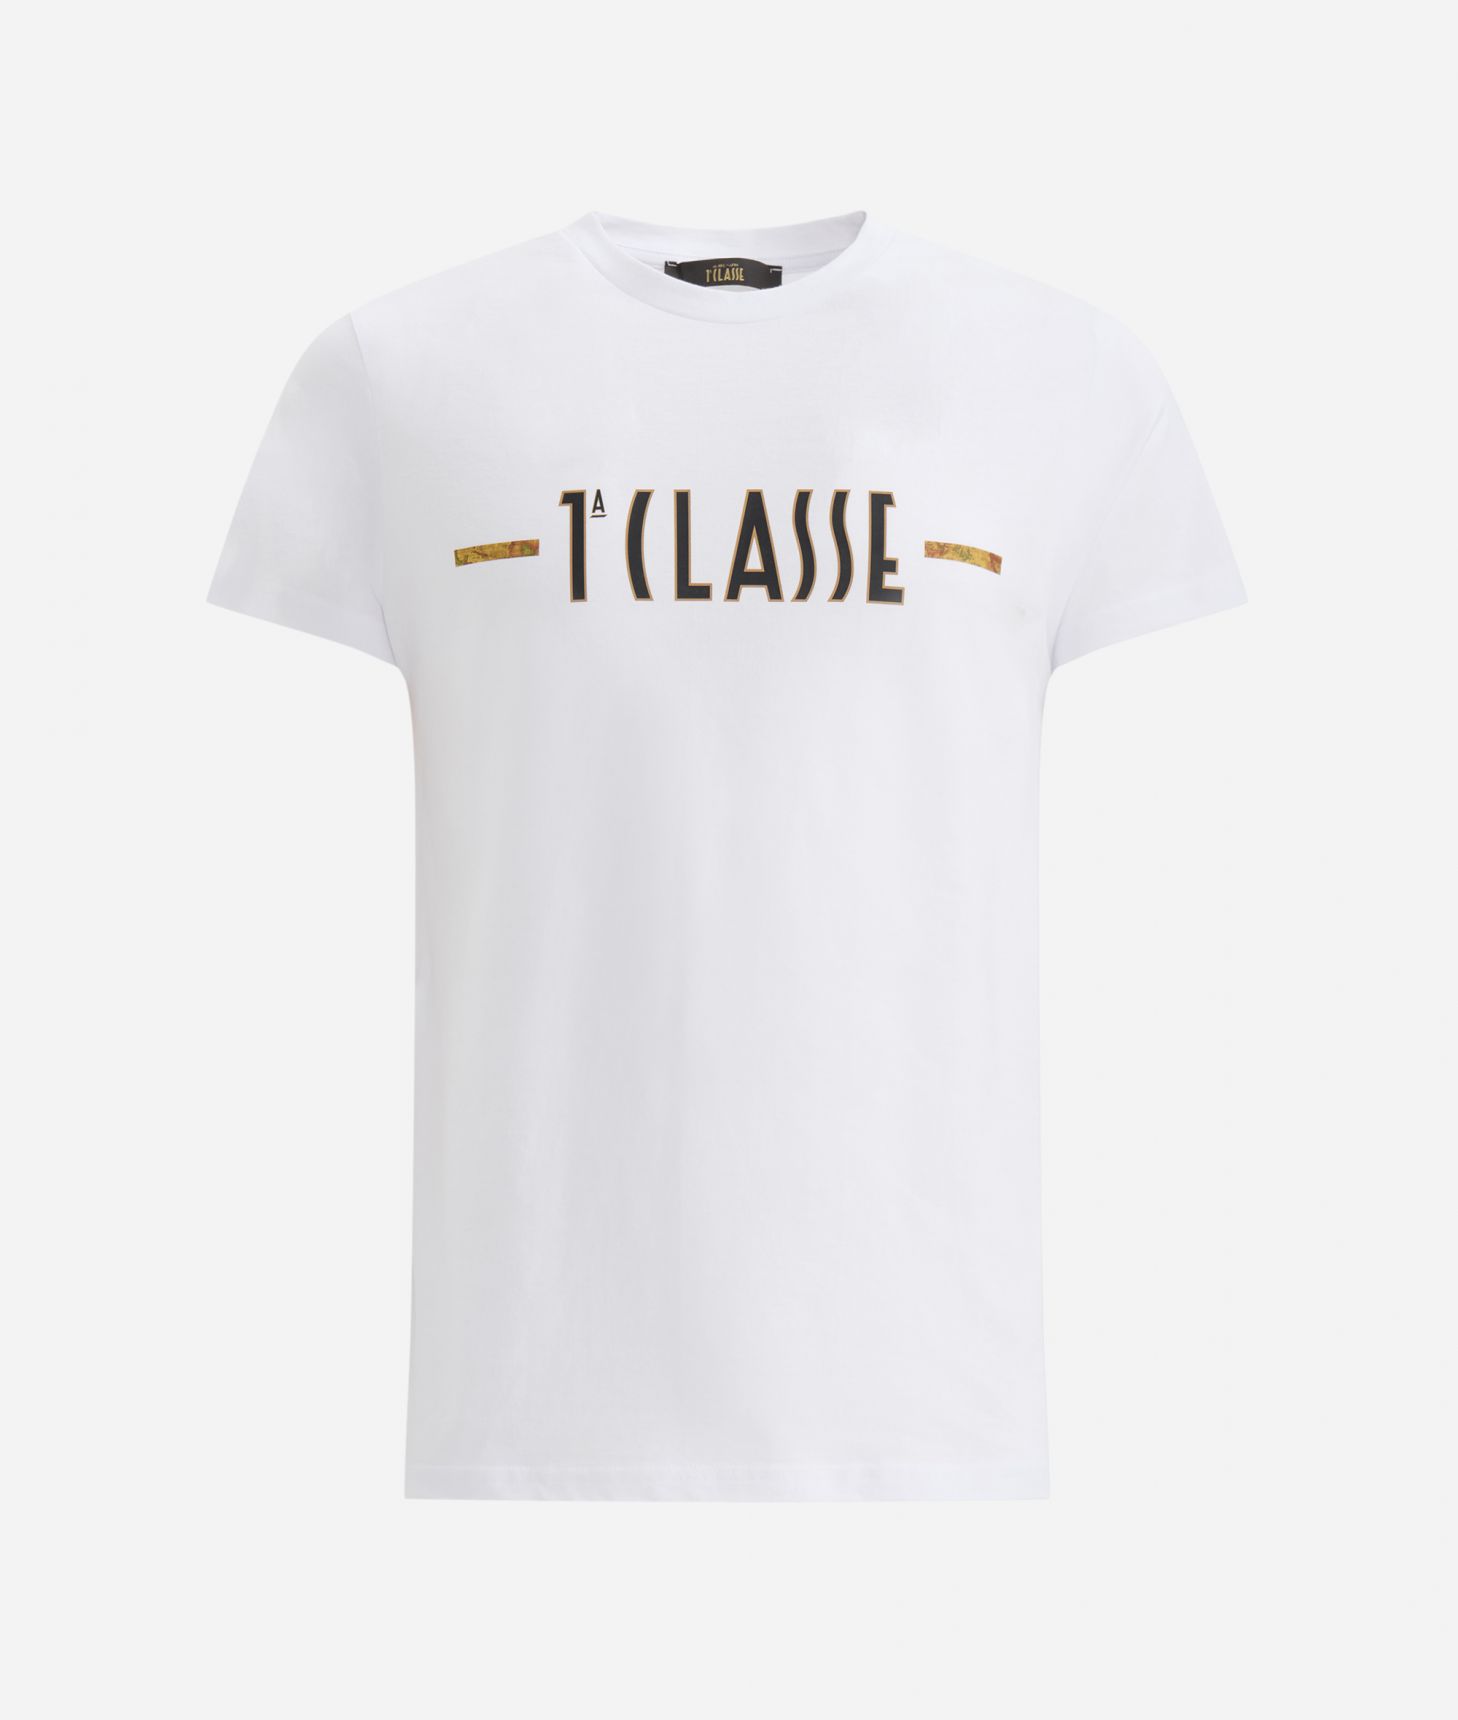 T-shirt in cotone con logo 1ᴬ Classe Bianca,front